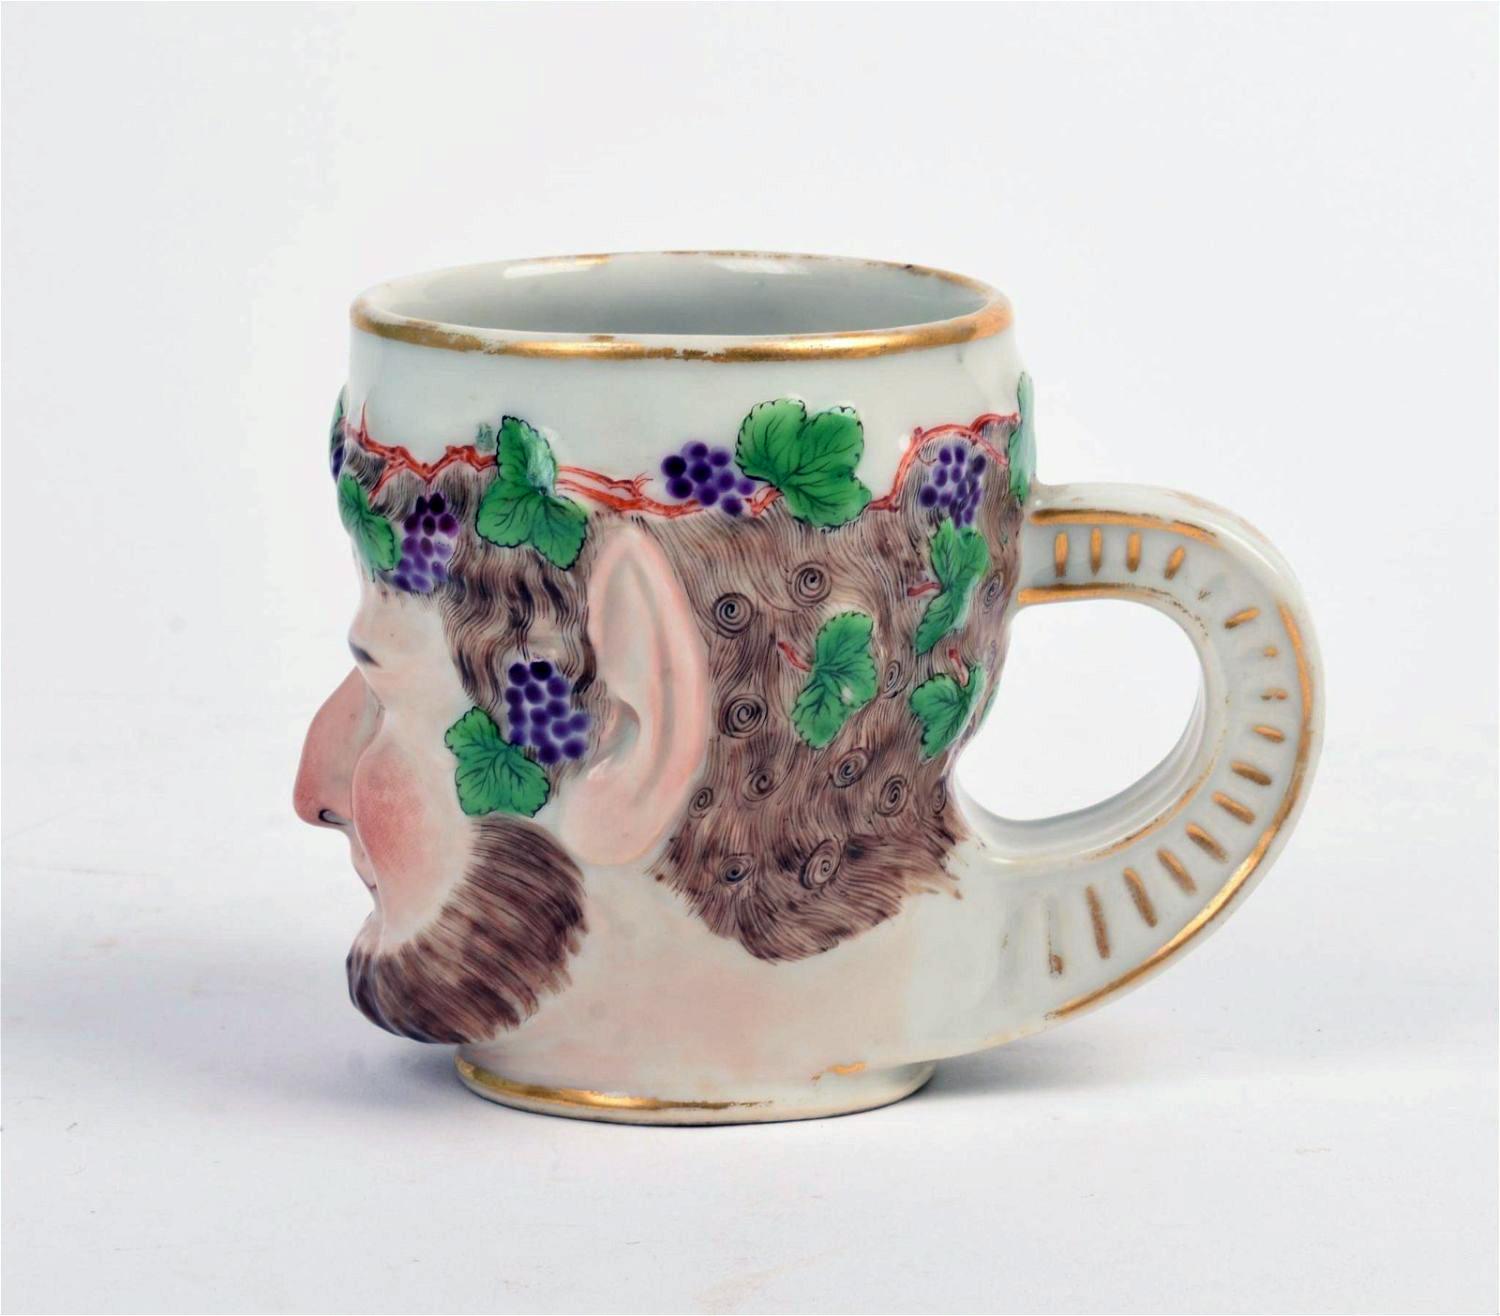 Chinese Export Porcelain Bacchus Mug After Derby Porcelain In Good Condition For Sale In Downingtown, PA